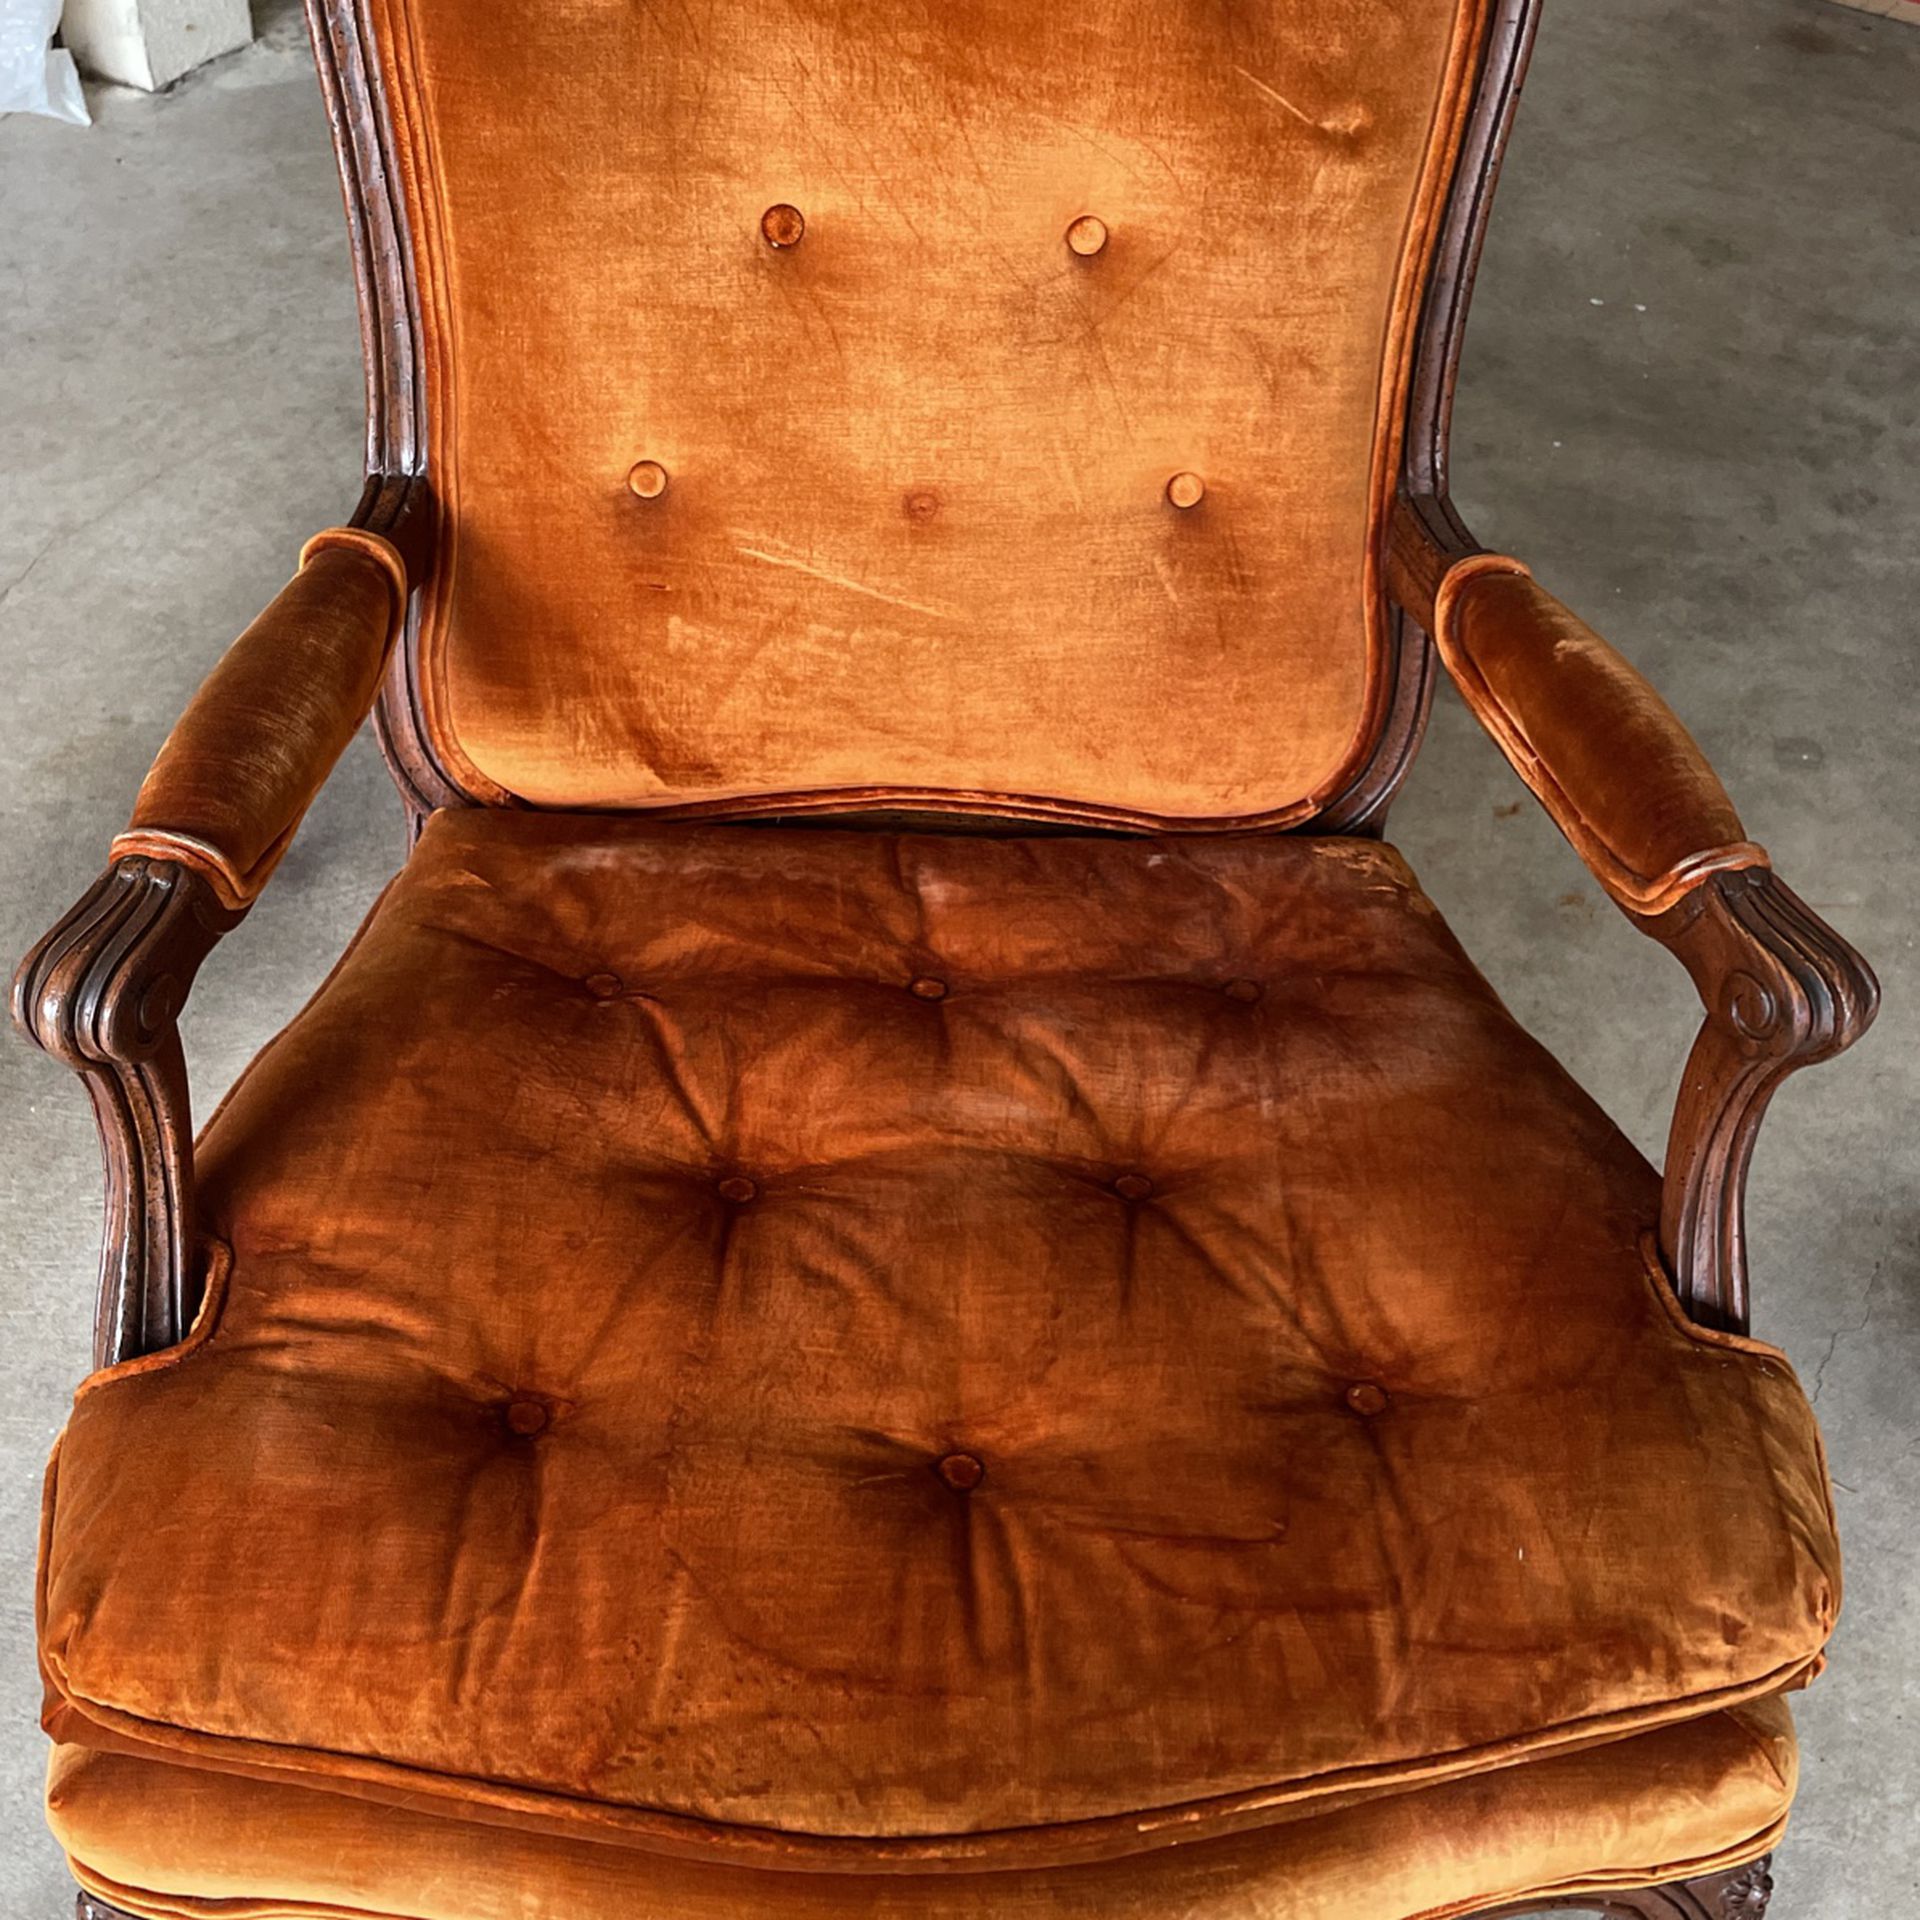 2 Antique chairs